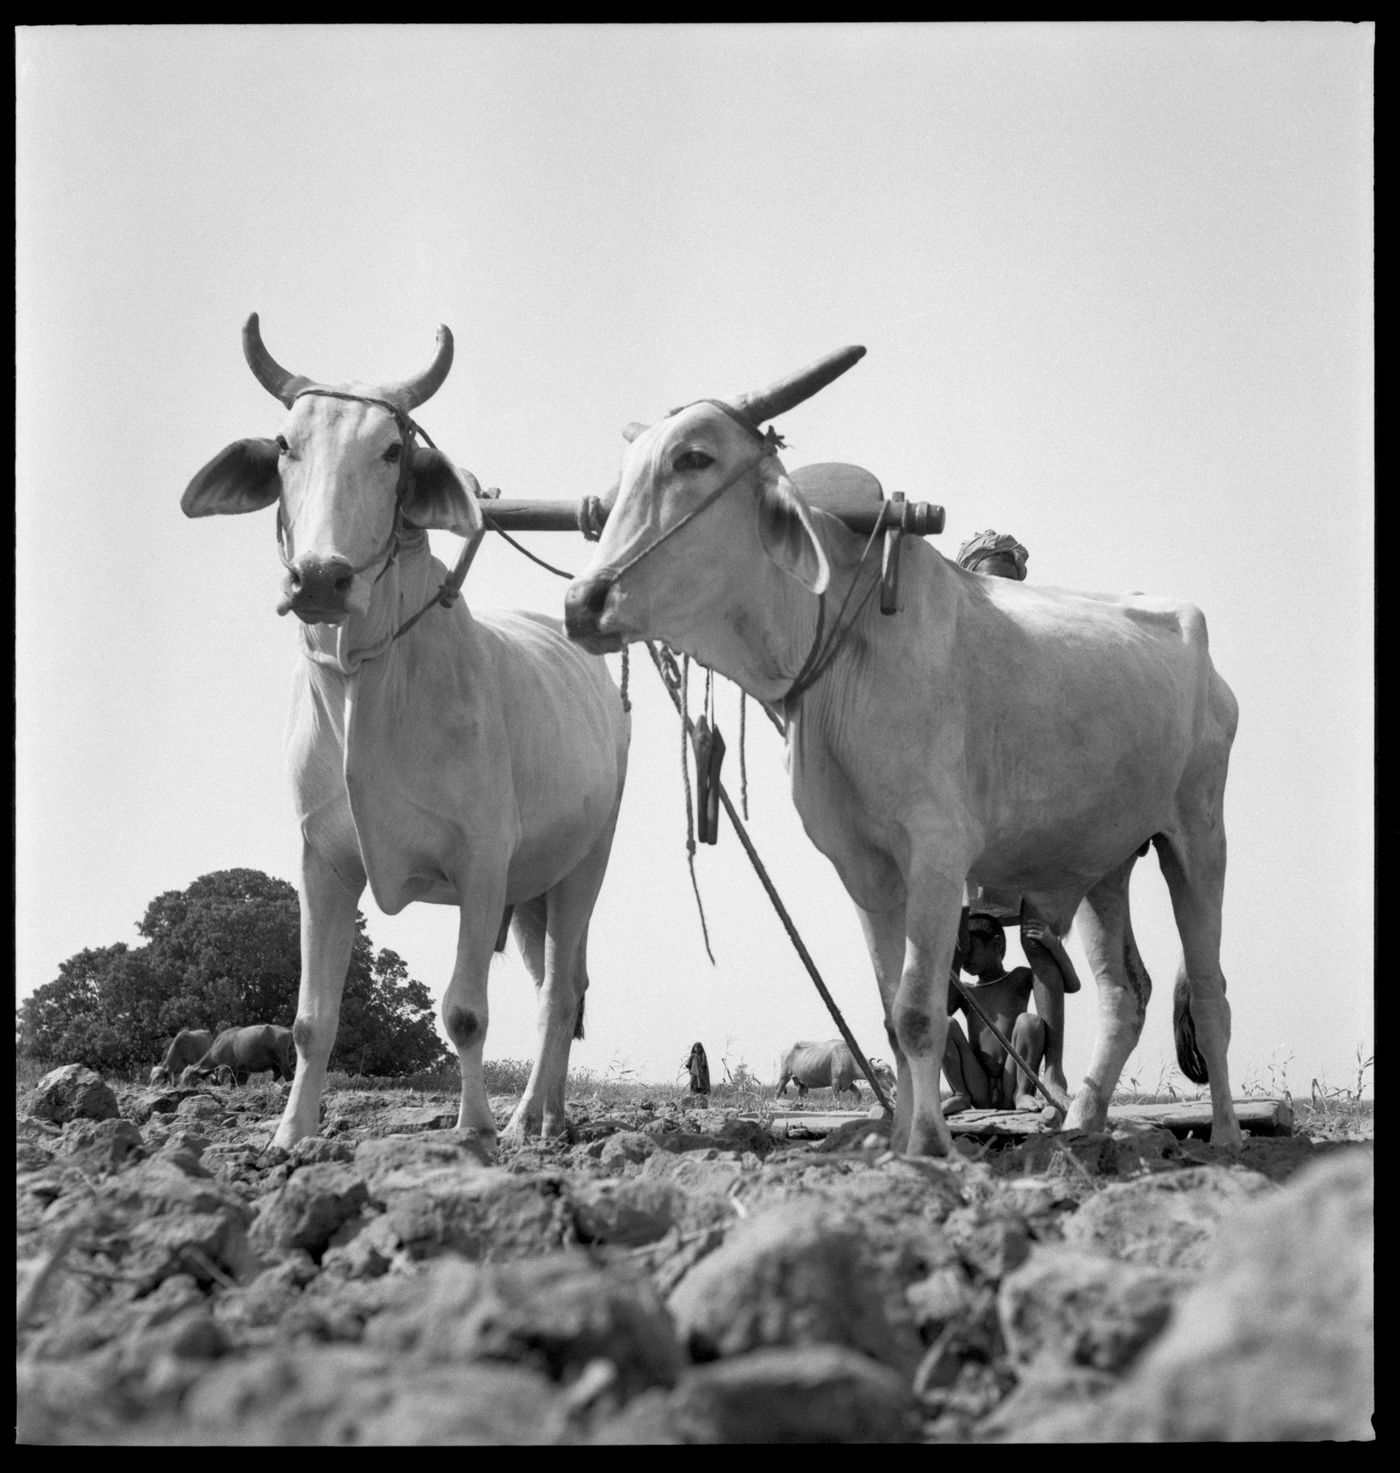 Bulls pulling a plow in Chandigarh's area before the construction, India